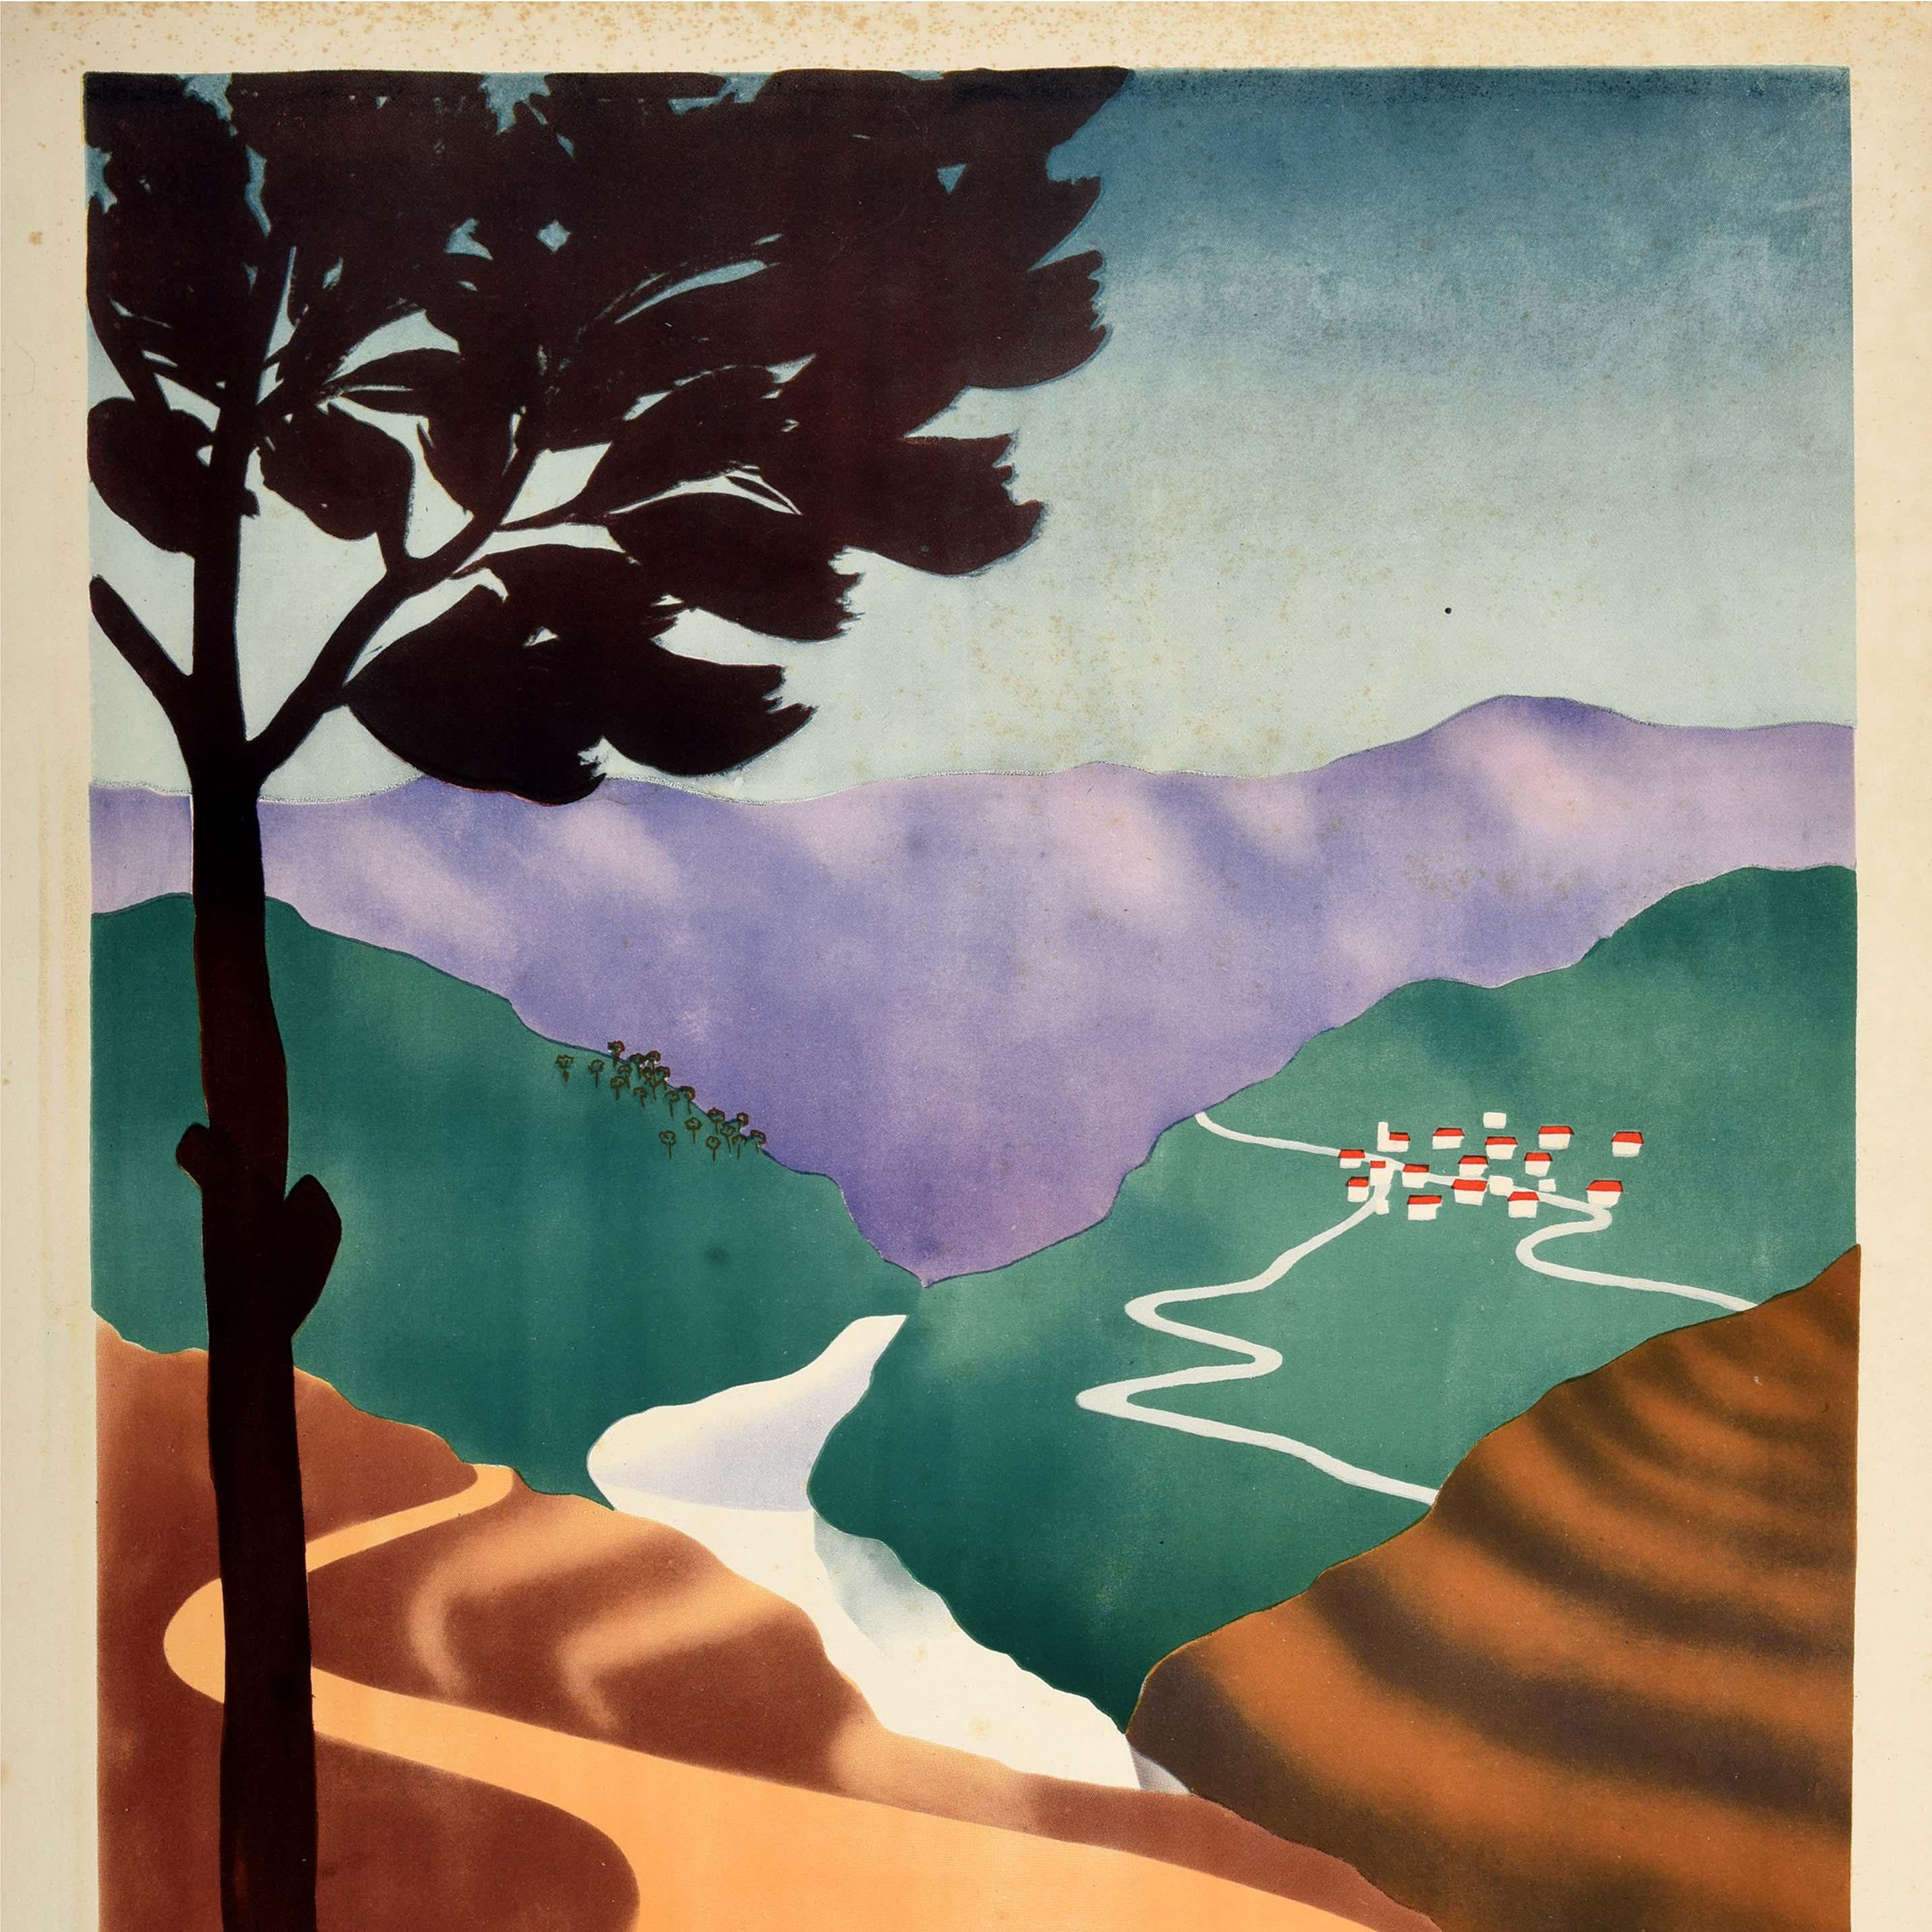 Original vintage Middle East travel poster for Lebanon - To The Cool Mountain Air The Lebanese Way - featuring scenic artwork of a path winding through the countryside into the distance with rolling hills and a river flowing through a valley towards